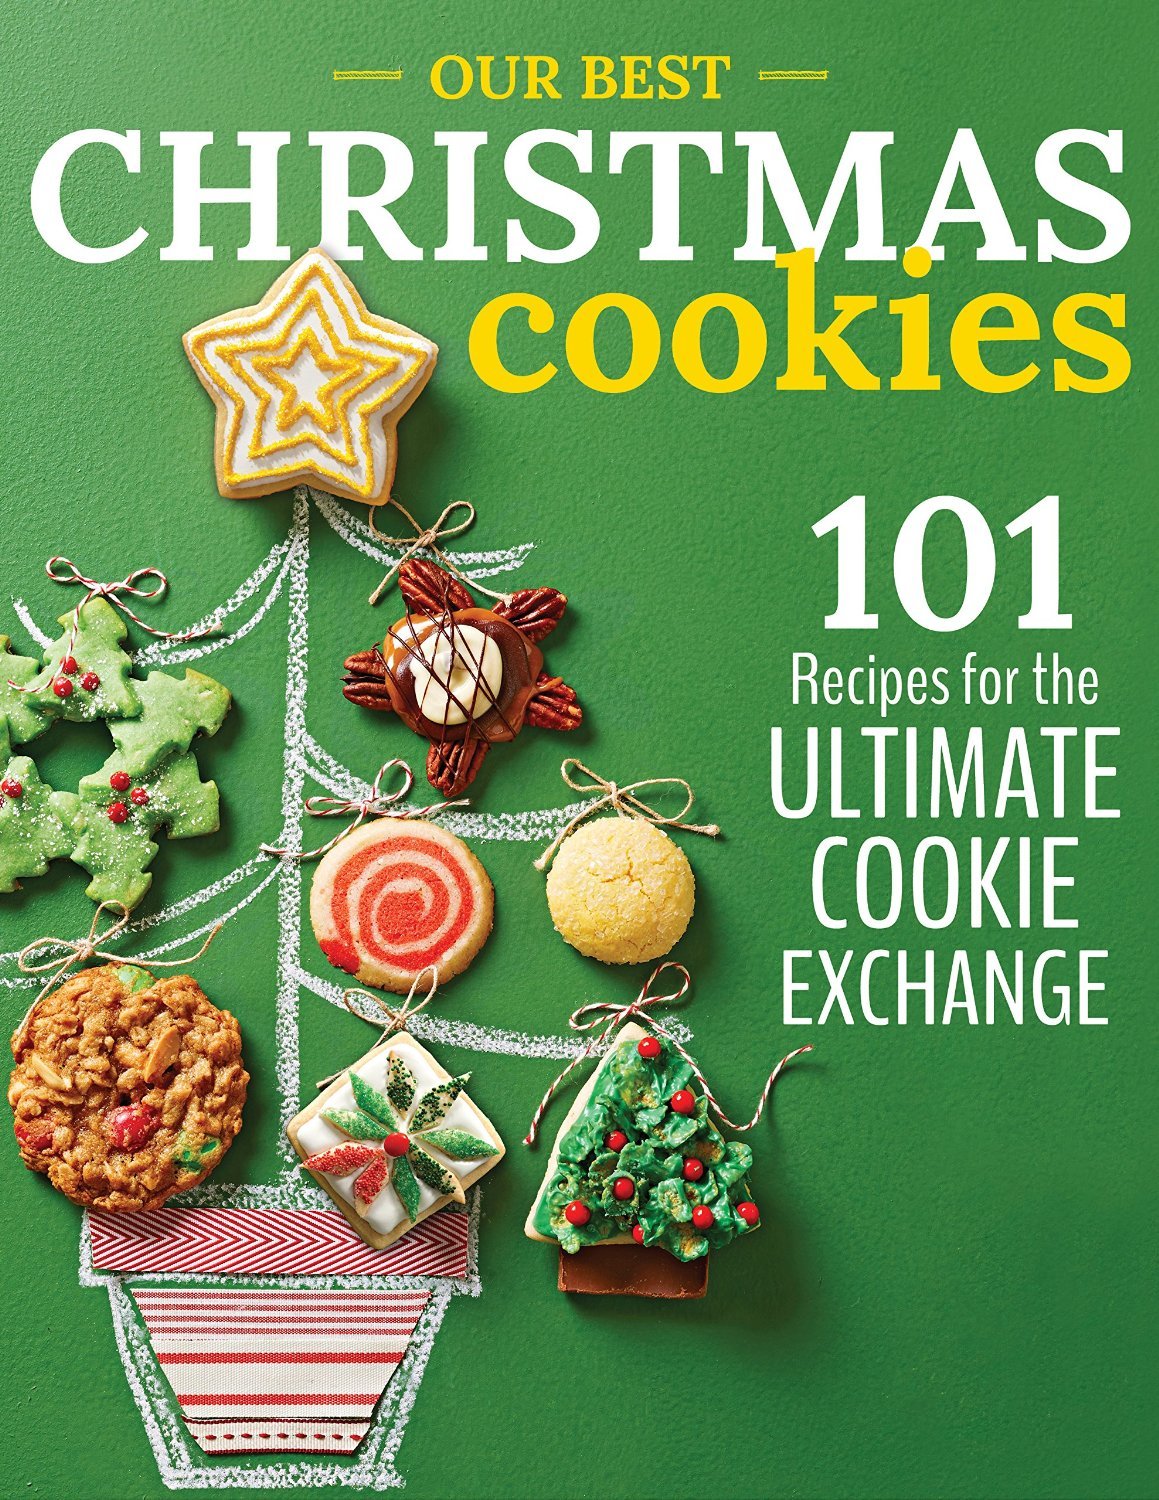 Our BEST Christmas Cookies 101 recipes for the ultimate cookie